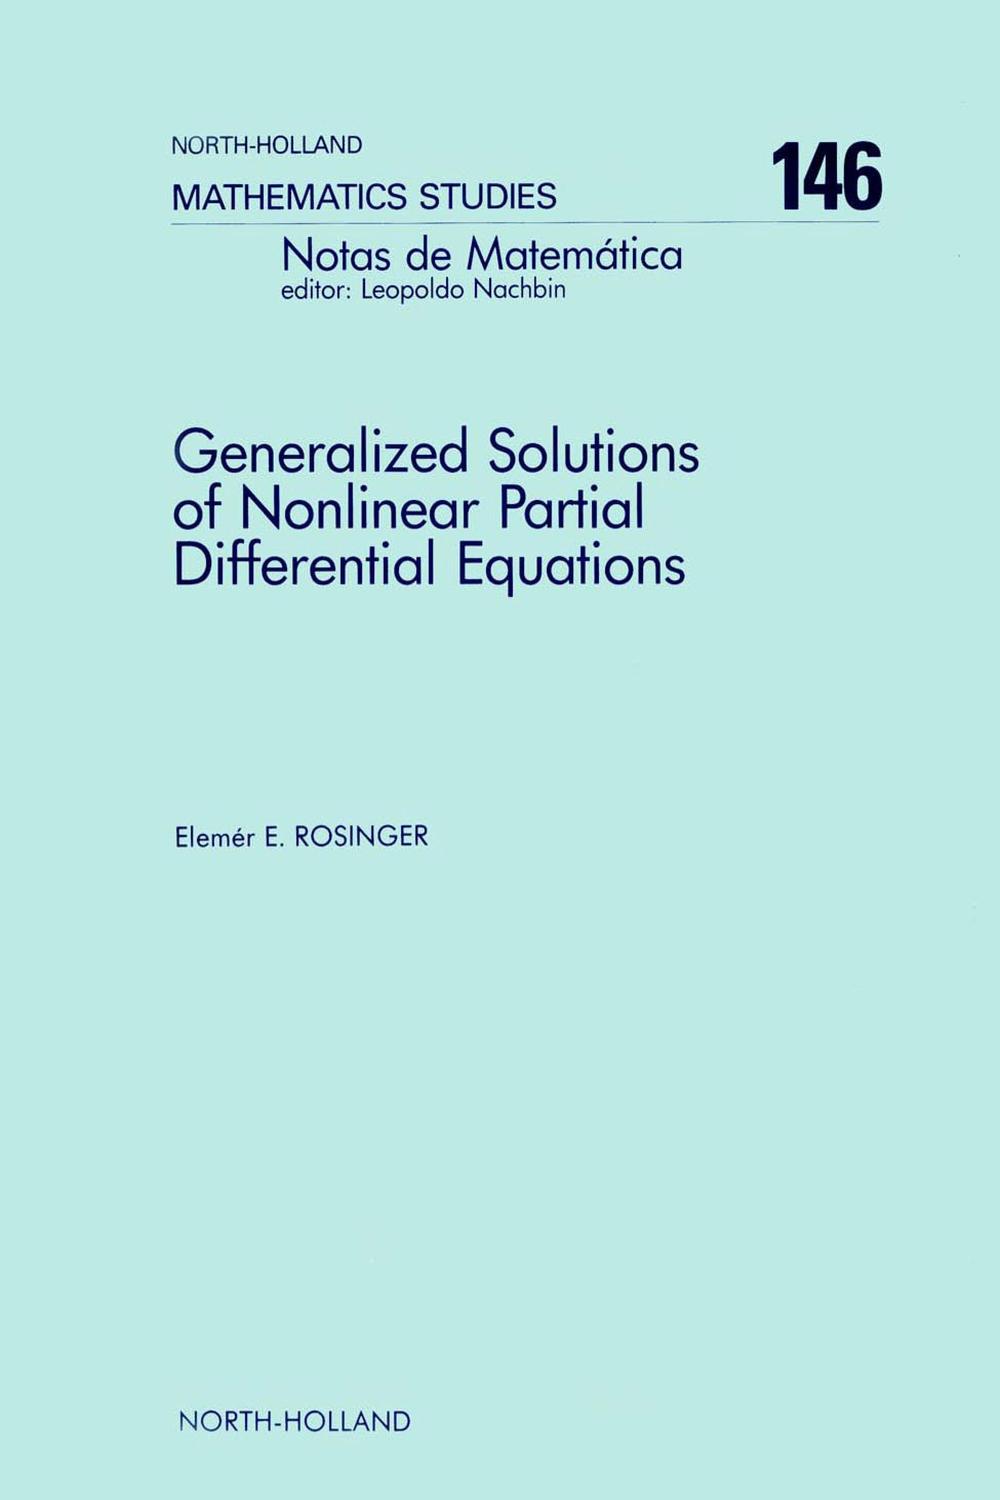 Generalized Solutions of Nonlinear Partial Differential Equations - E.E. Rosinger